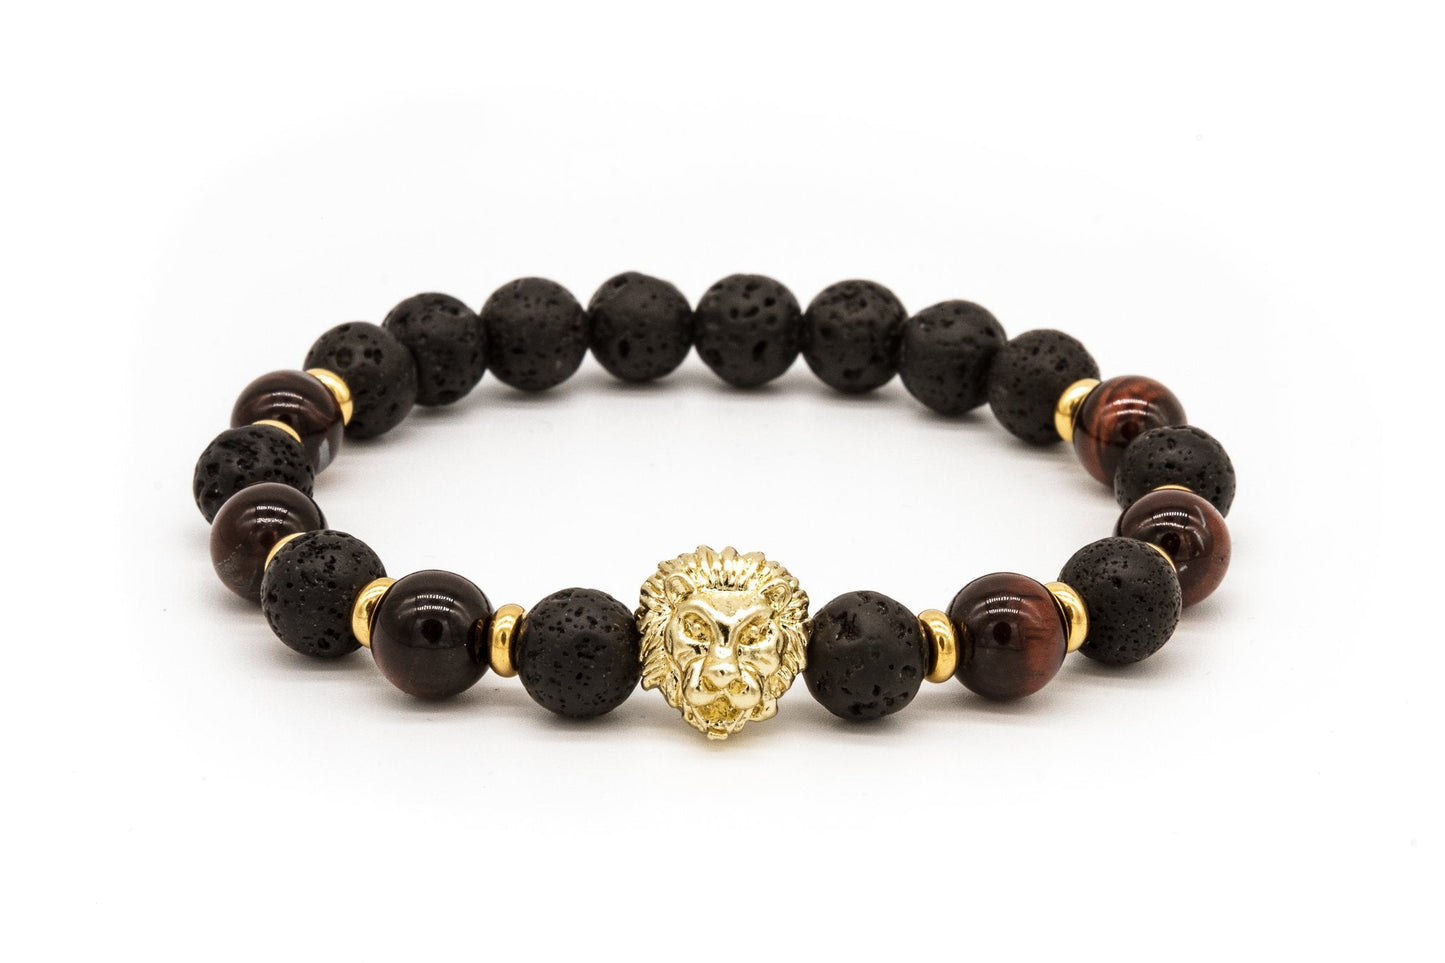 UNCOMMON Men's Beads Bracelet One Gold Lion Charm Onyx and Tiger-Eye Beads